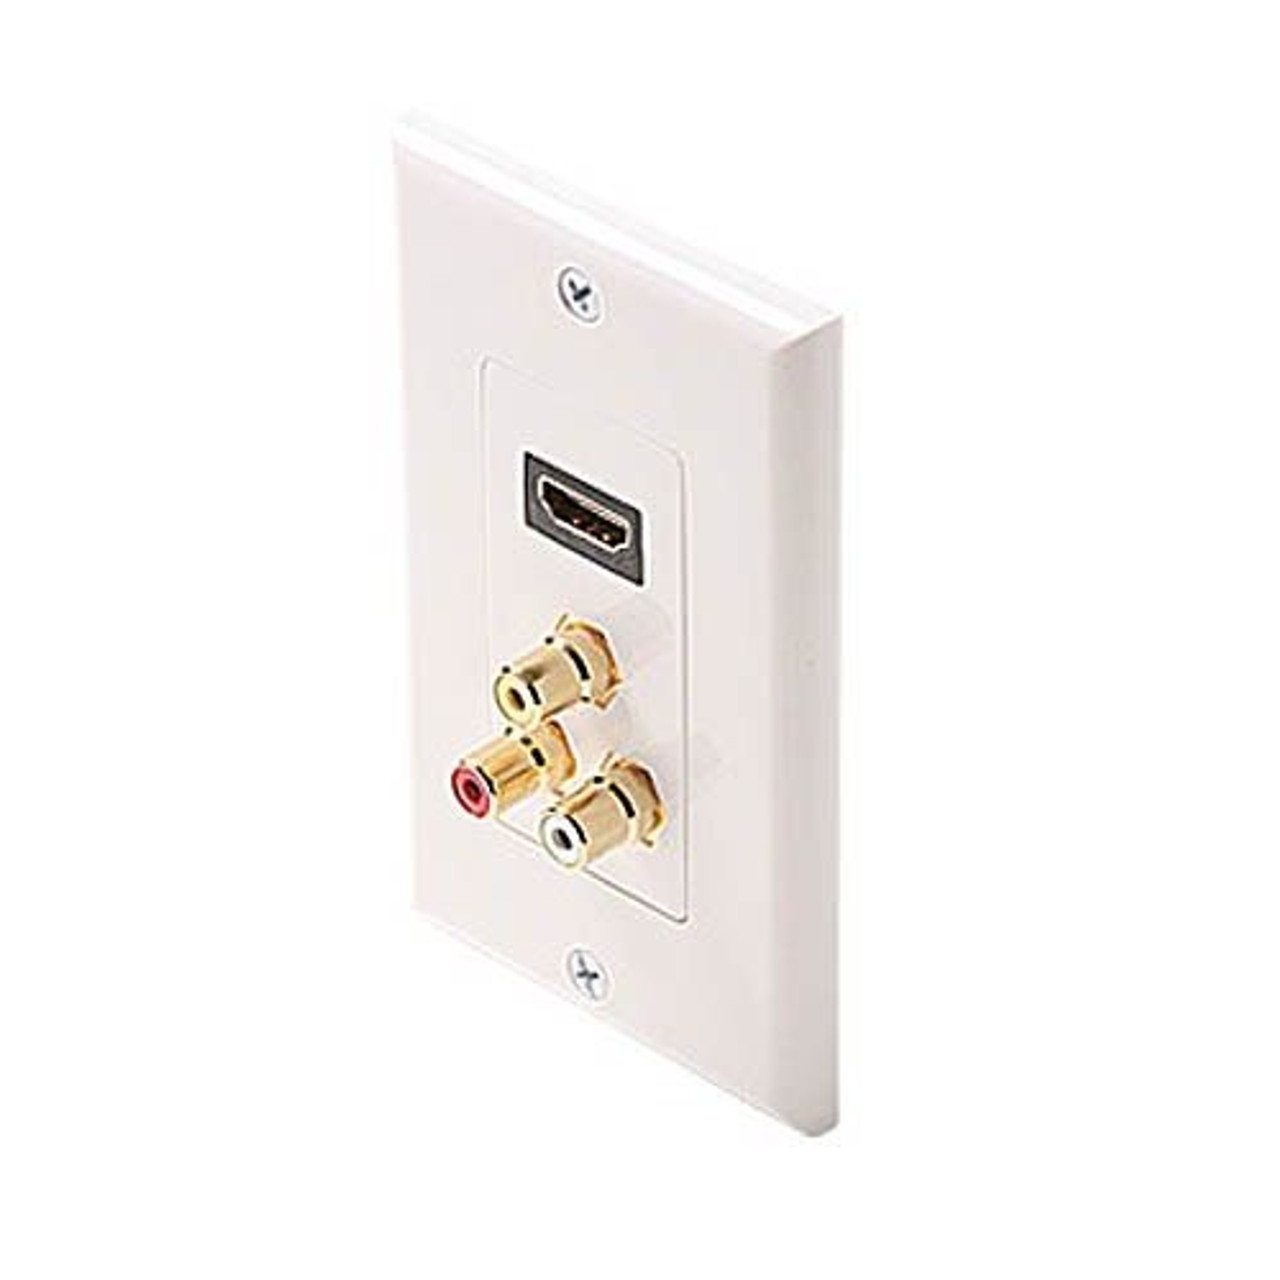 Eagle HDMI Wall Plate 3 RCA Female Jack White Composite Gold Plate Feed Thru Decorator Style White Combo HDMI Female to HDMI Female HDTV Applications